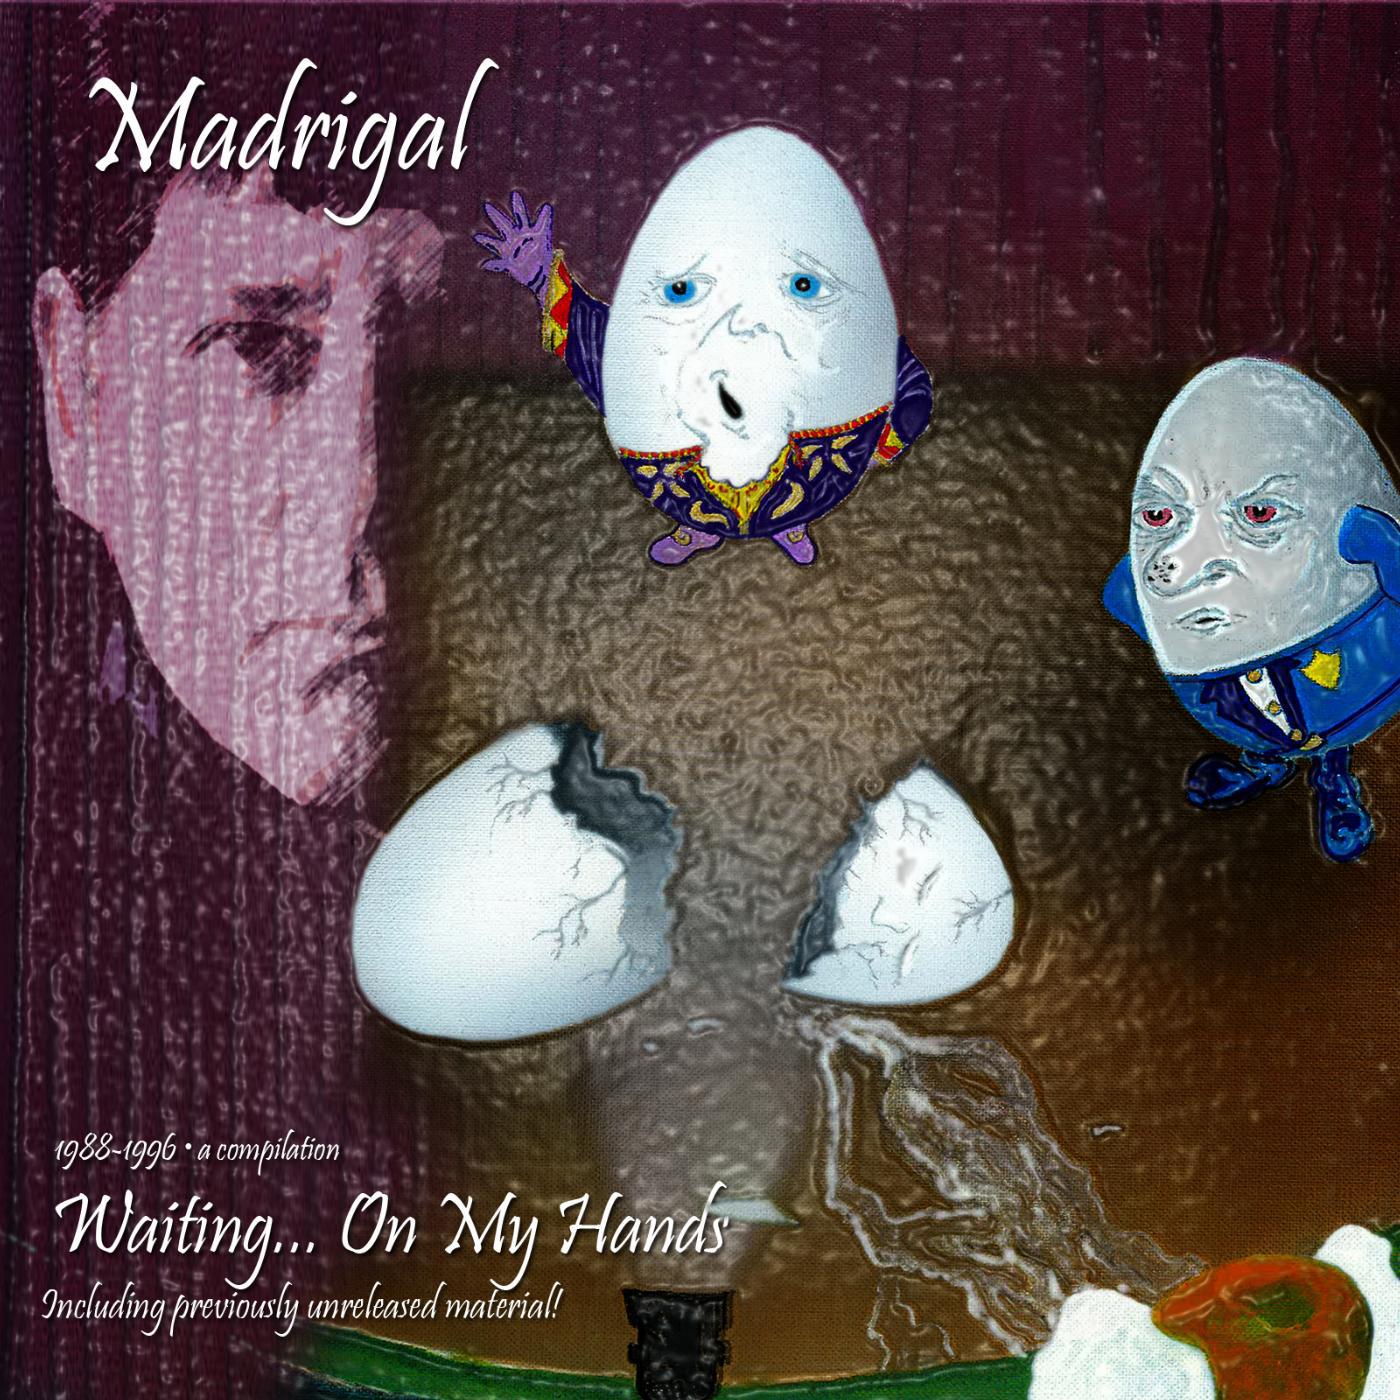 Постер альбома Madrigal 1988-1996 a Compilation Waiting & on My Hands